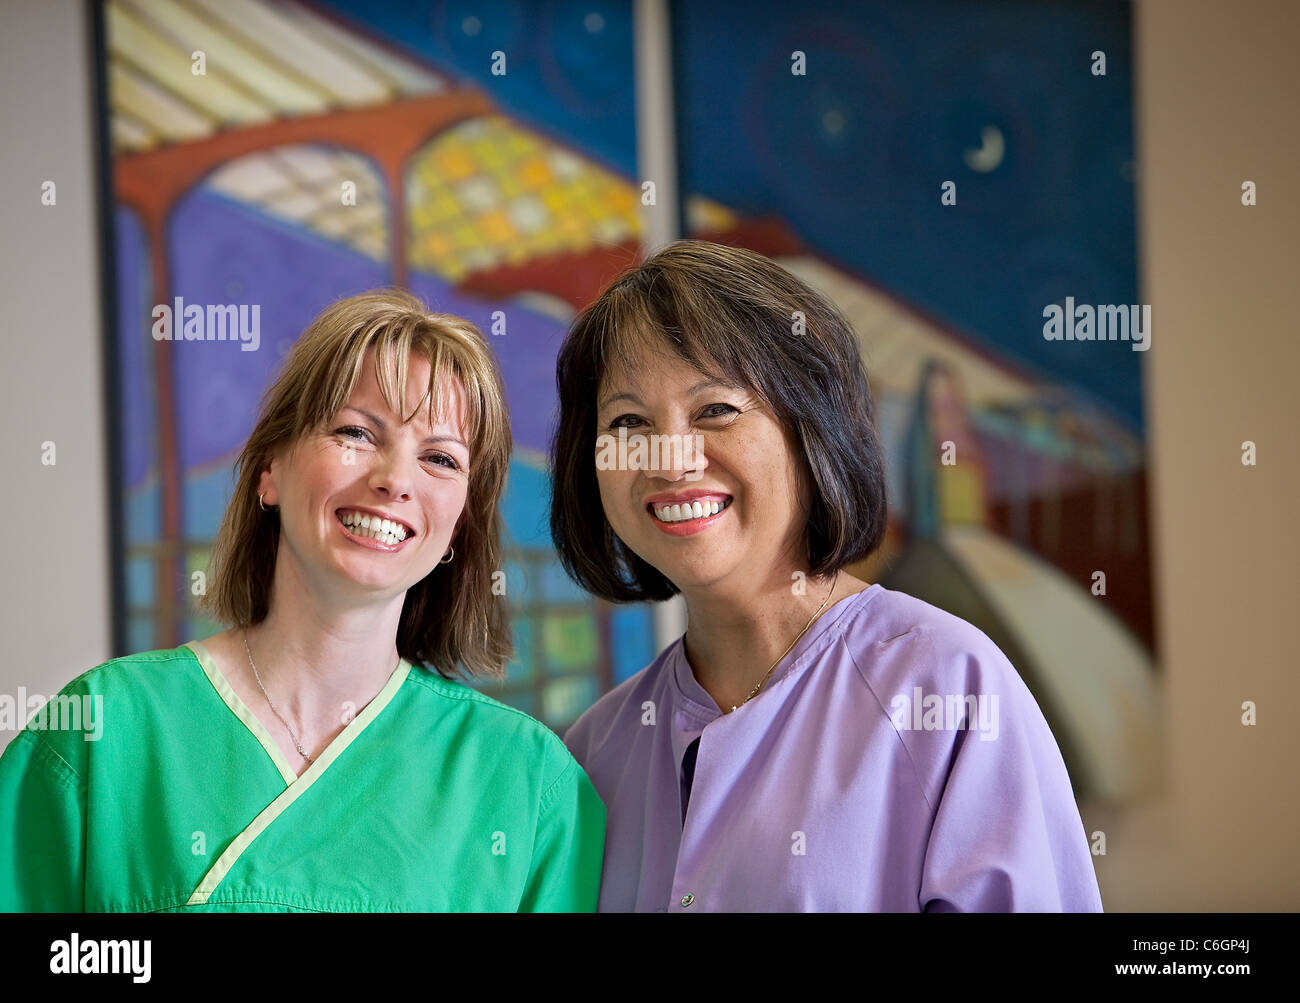 Two nurses pose by a painting in a hospital. Stock Photo